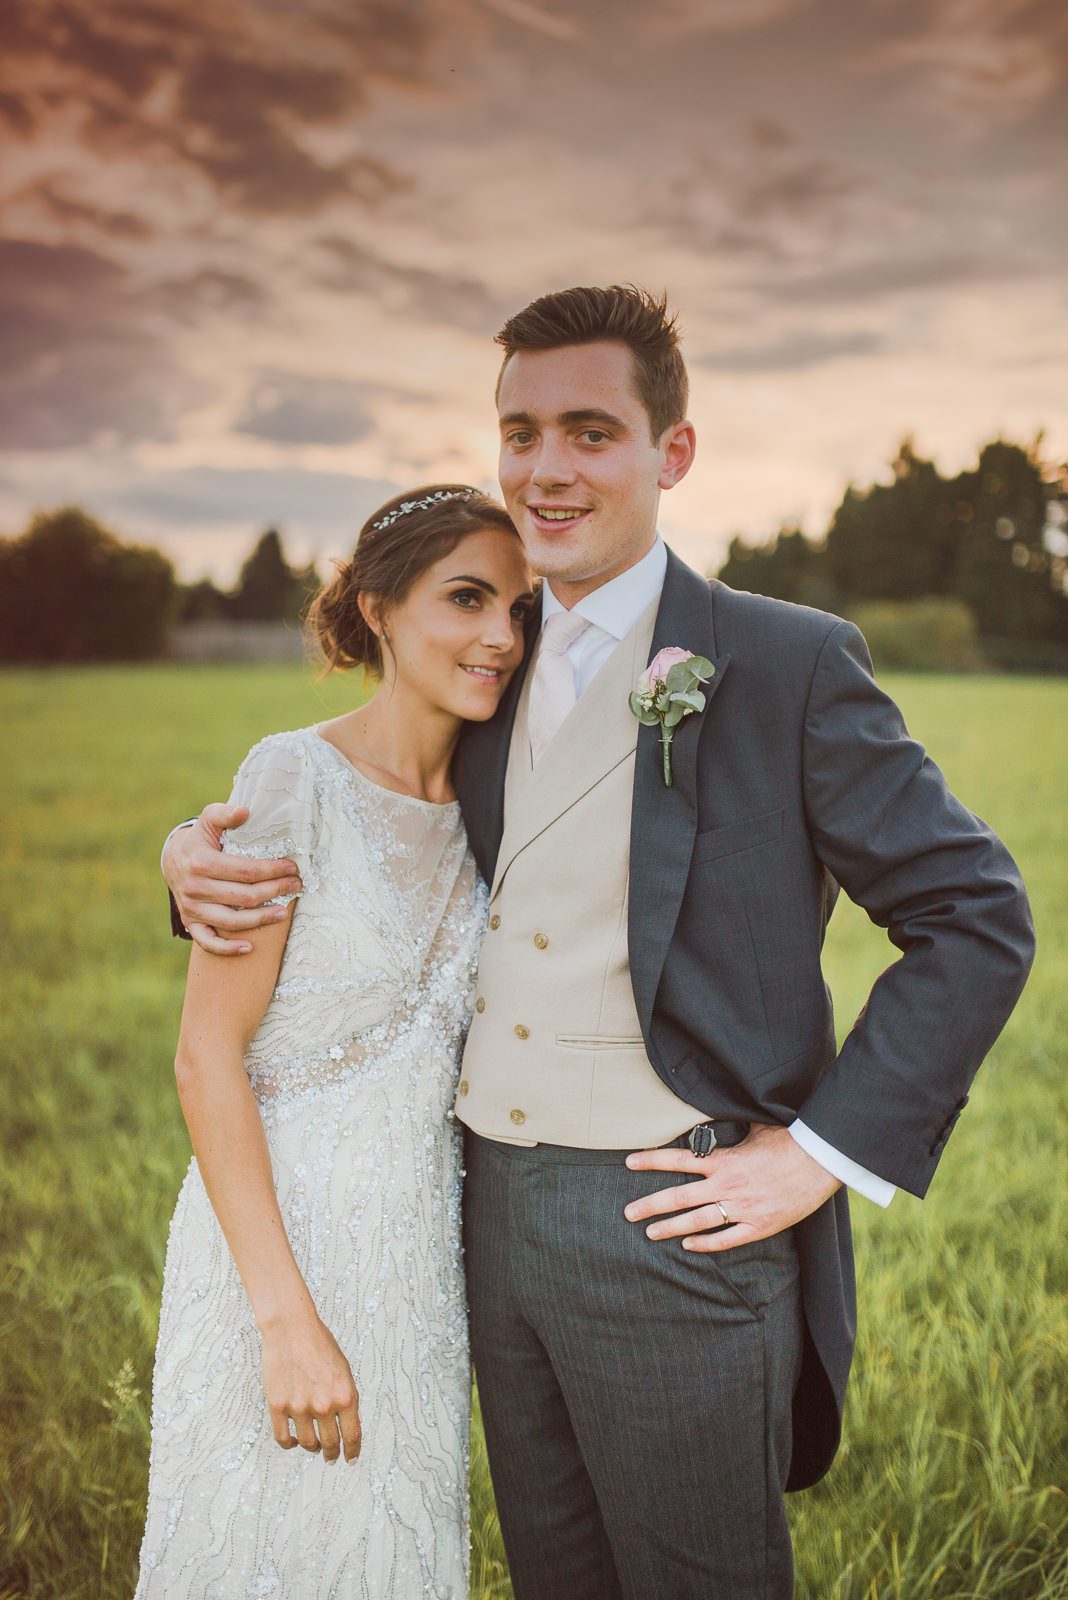 Sunset bride and groom portraits